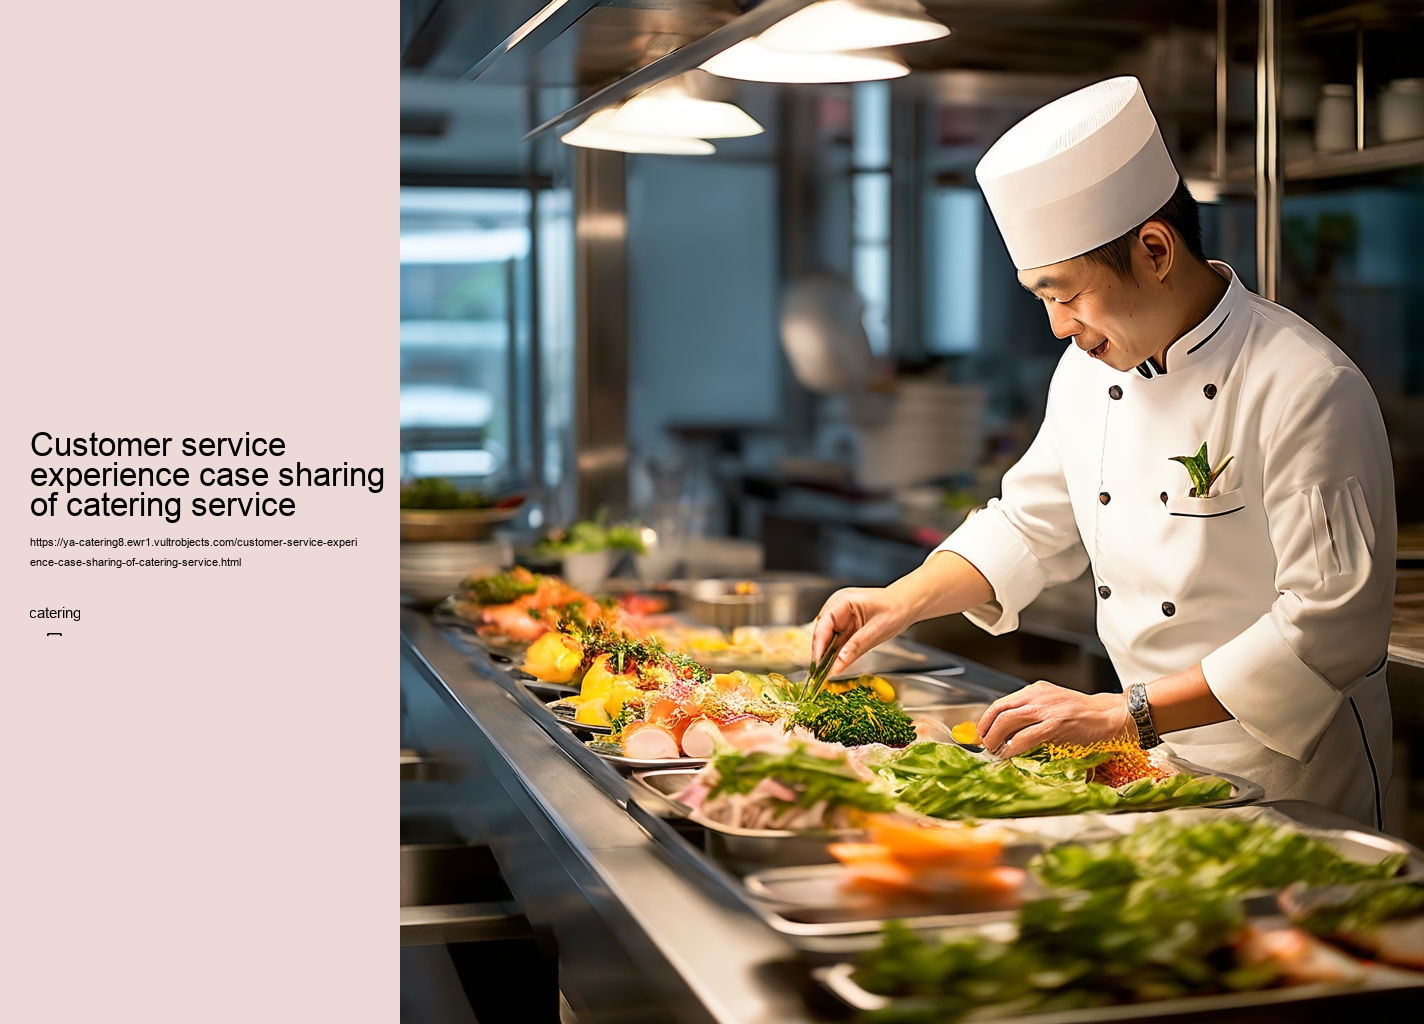 Customer service experience case sharing of catering service